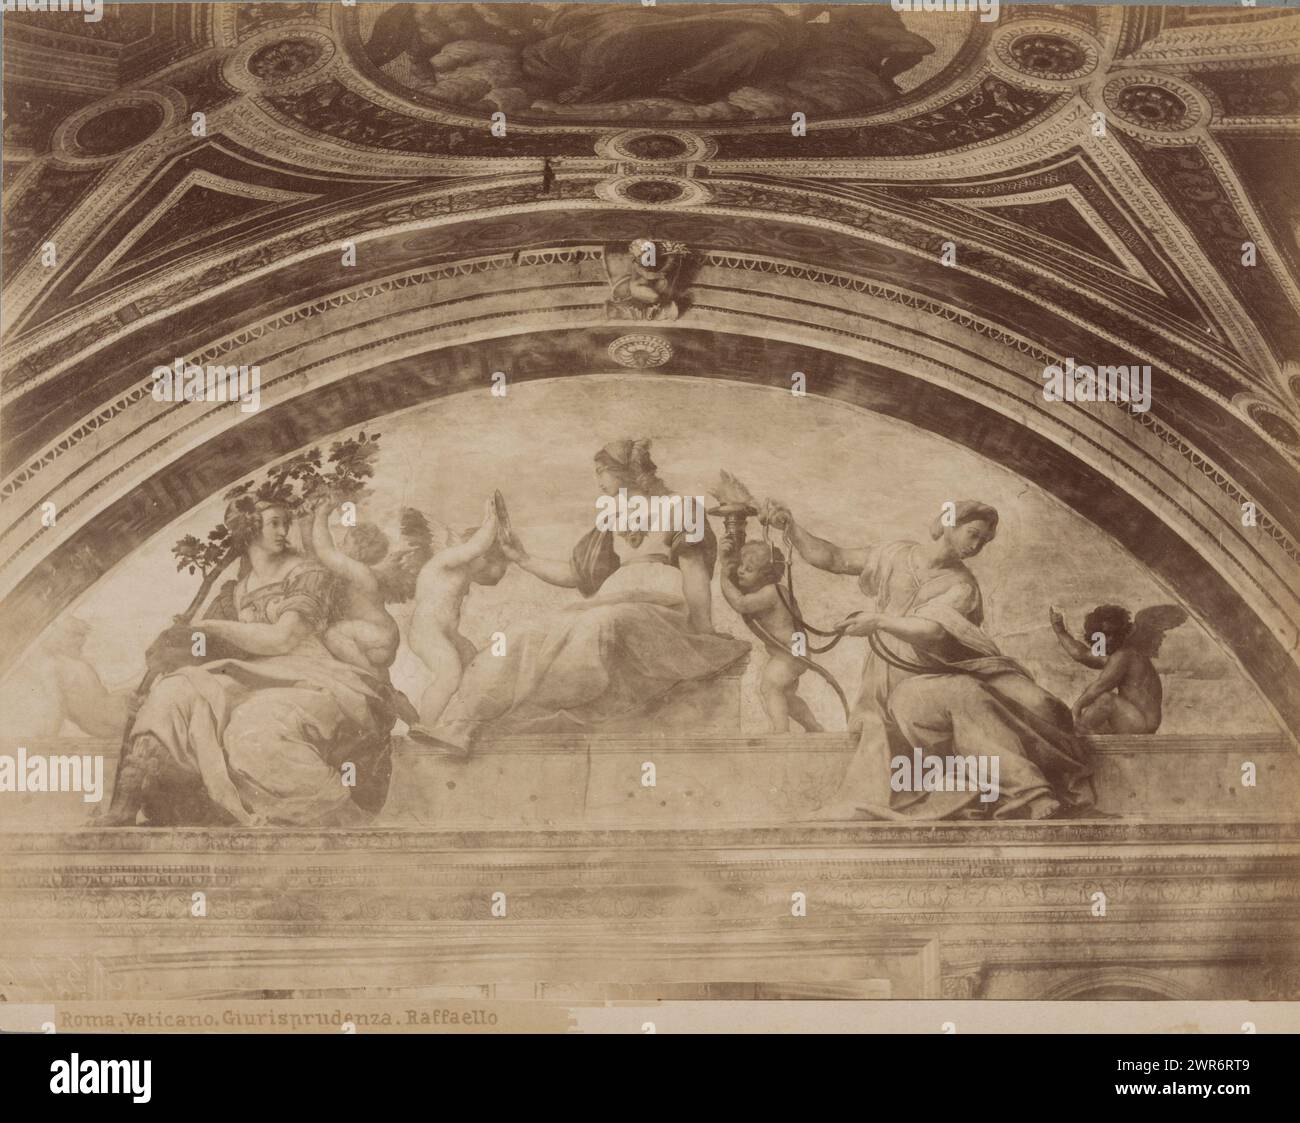 Photo reproduction of the fresco Cardinal Virtues by Raphael in the Stanze di Raffaello, Vatican City, Roma. Vaticano. Giurisprudenza. Raffaello (title on object), anonymous, after painting by: Rafaël, Vatican City, 1851 - 1900, paper, albumen print, height 200 mm × width 254 mm, photograph Stock Photo